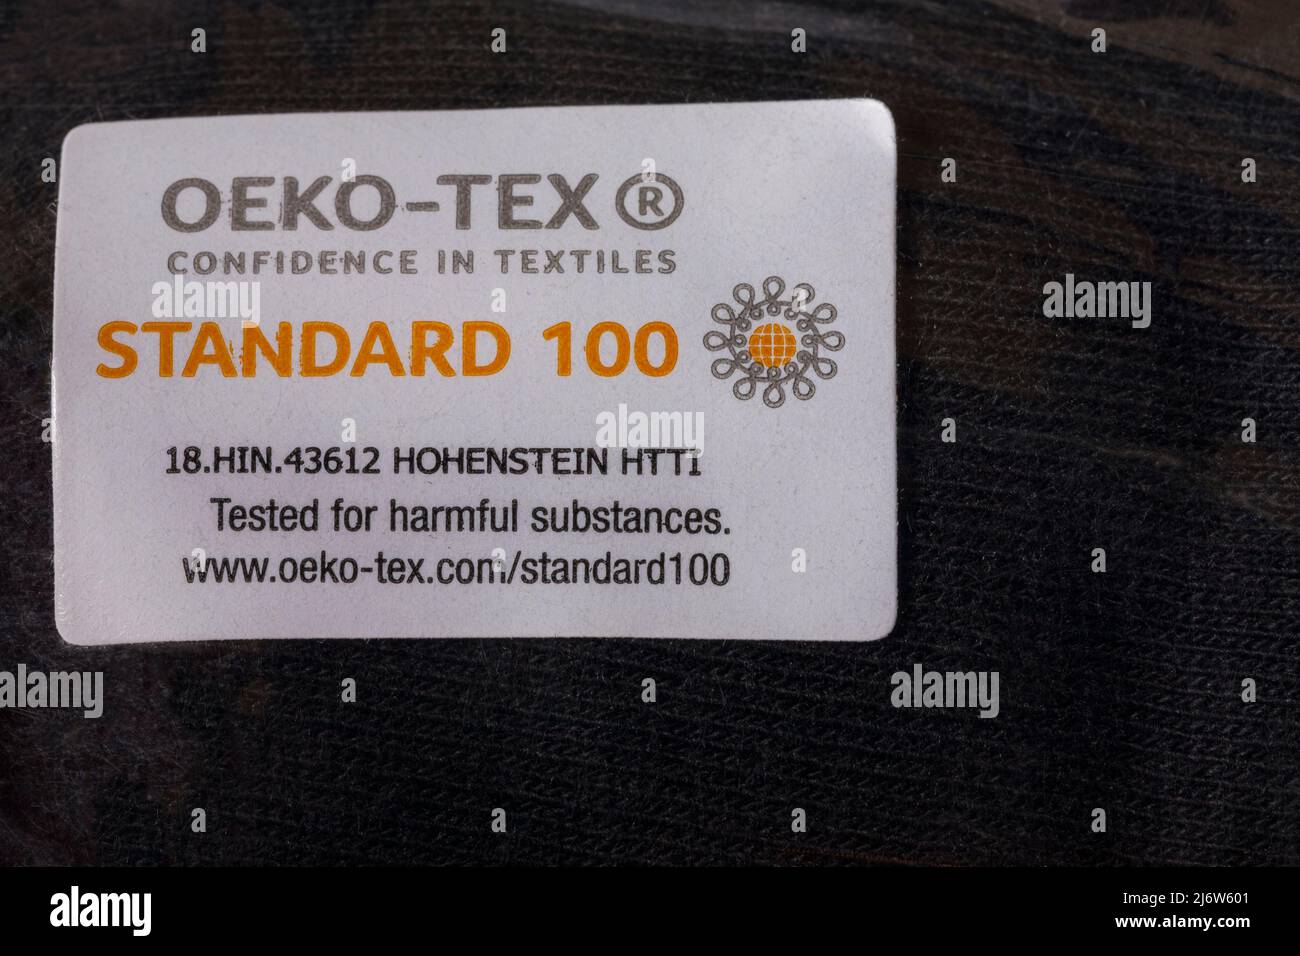 https://c8.alamy.com/comp/2J6W601/oeko-tex-confidence-in-textiles-standard-100-tested-for-harmful-substances-detail-on-label-on-textile-fabric-material-2J6W601.jpg